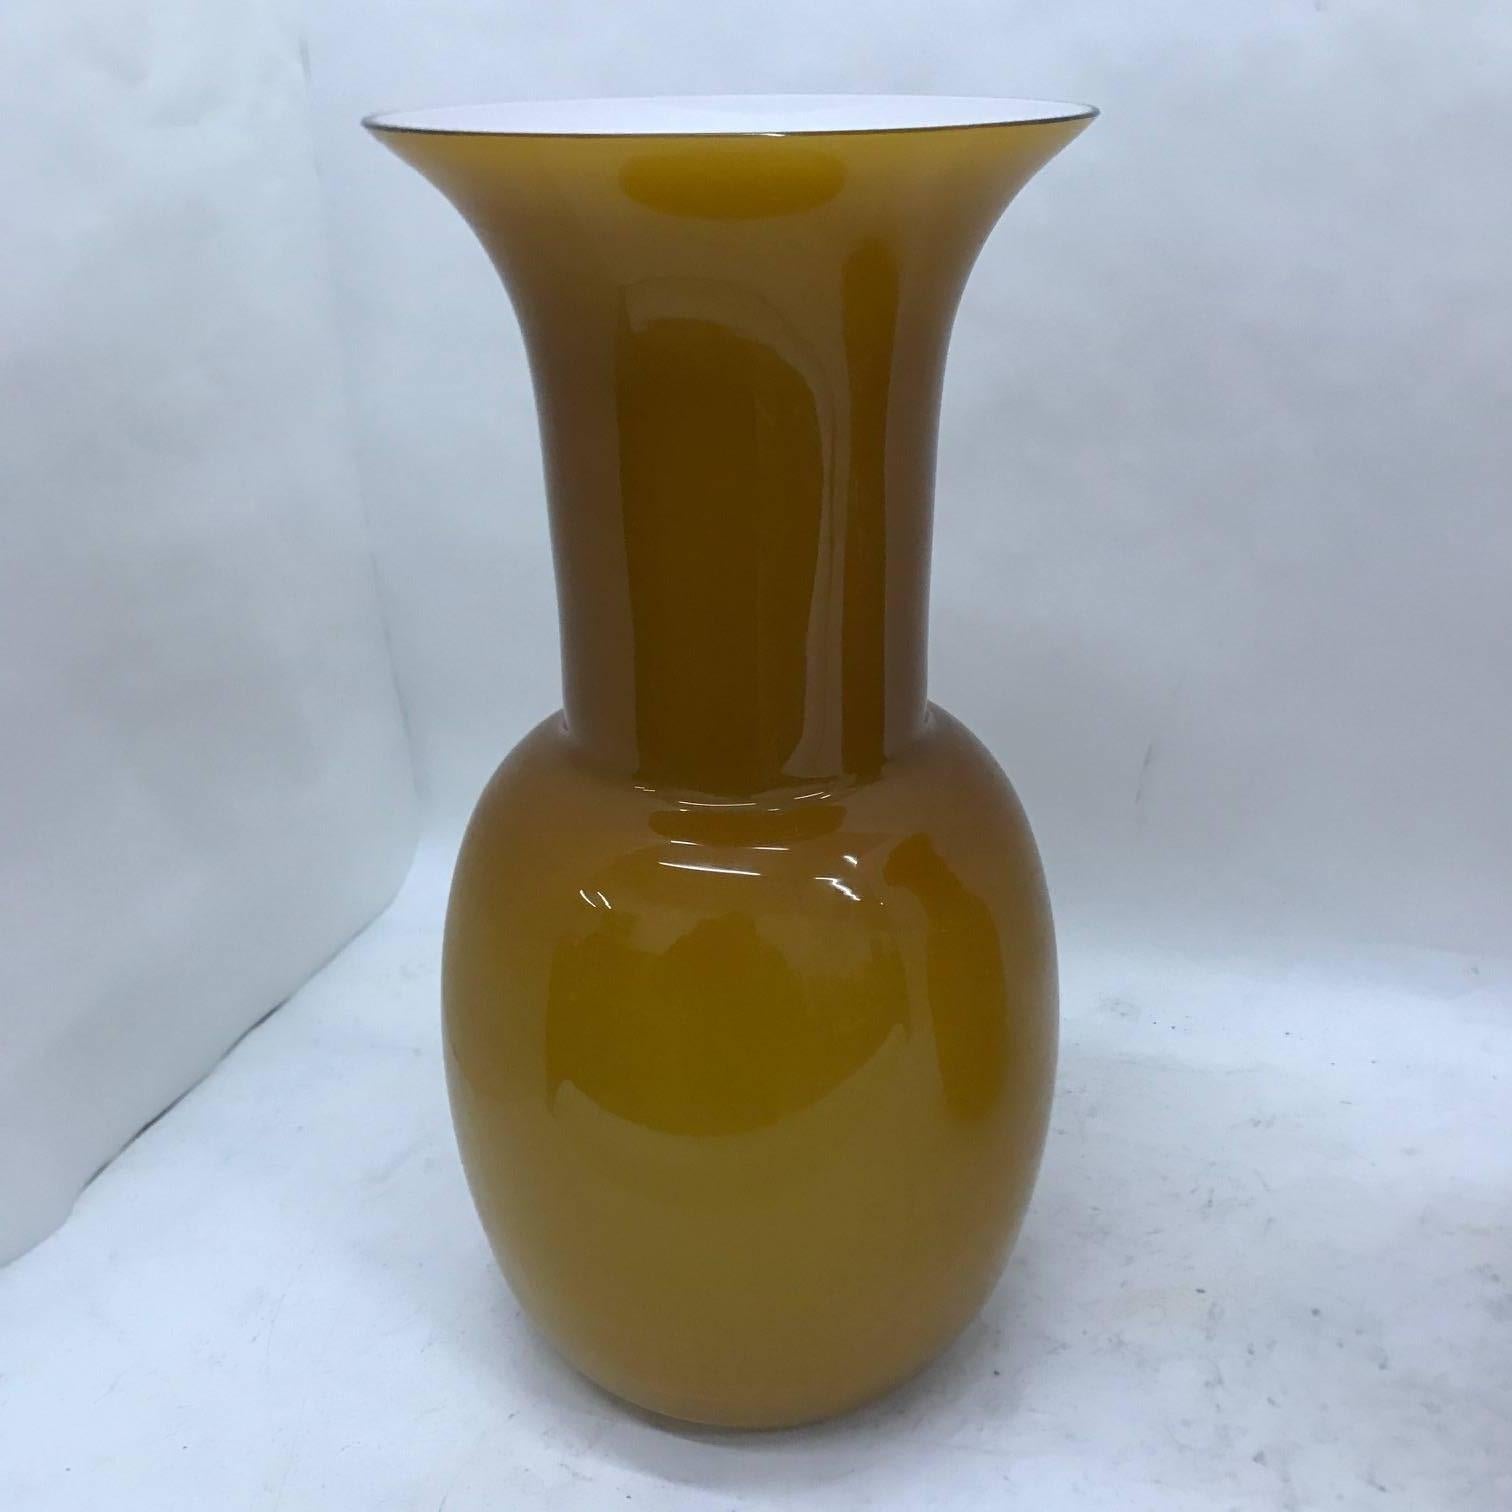 Pair of Murano glass vases signed by Aureliano Toso, made in 2001, brown color and white inside, good conditions overall.